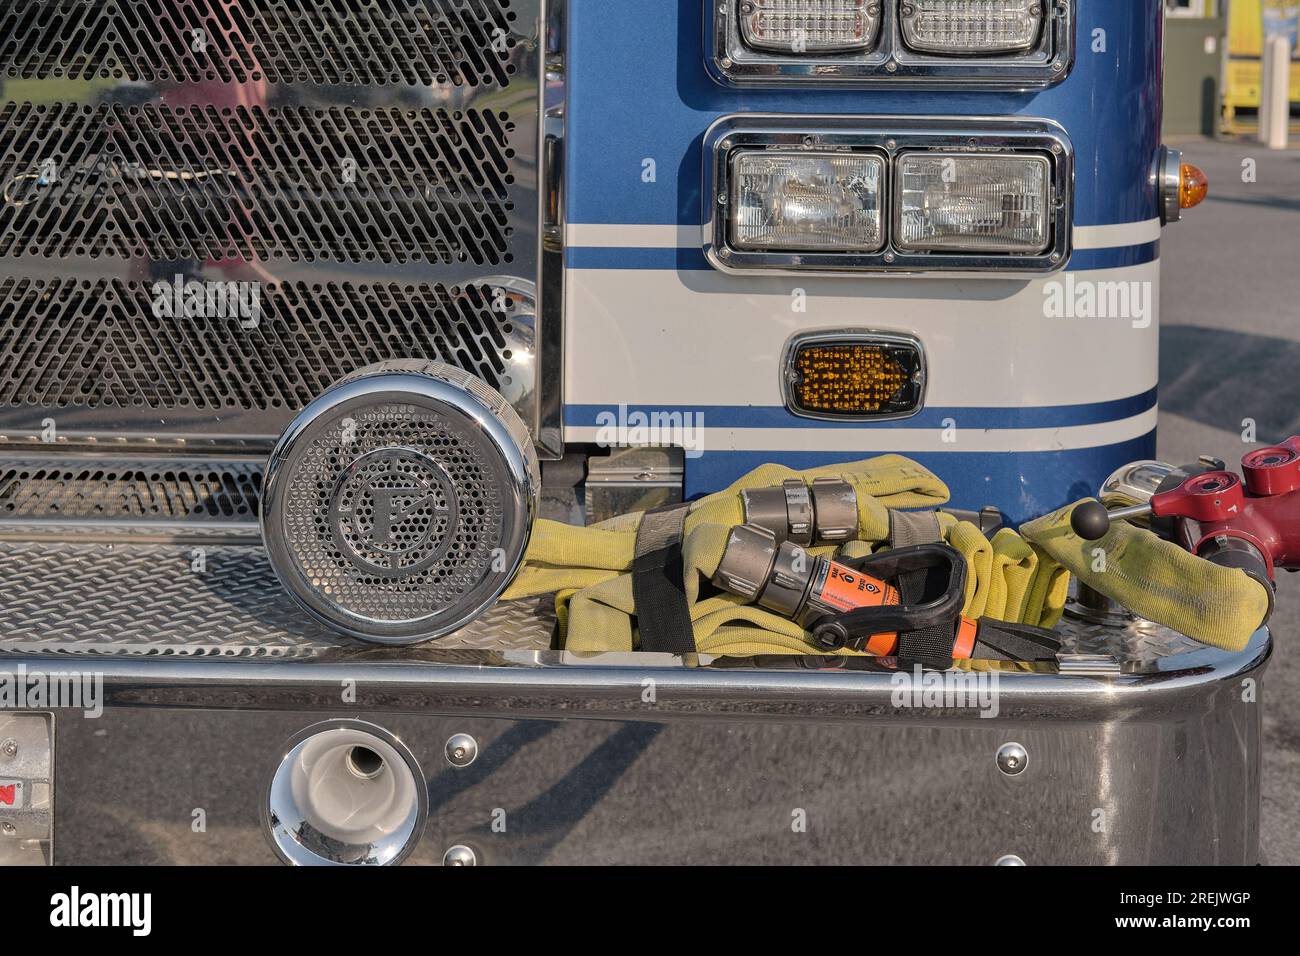 Hoses, siren, and valves on front bumper of a blue fire engine pumper truck. Stock Photo